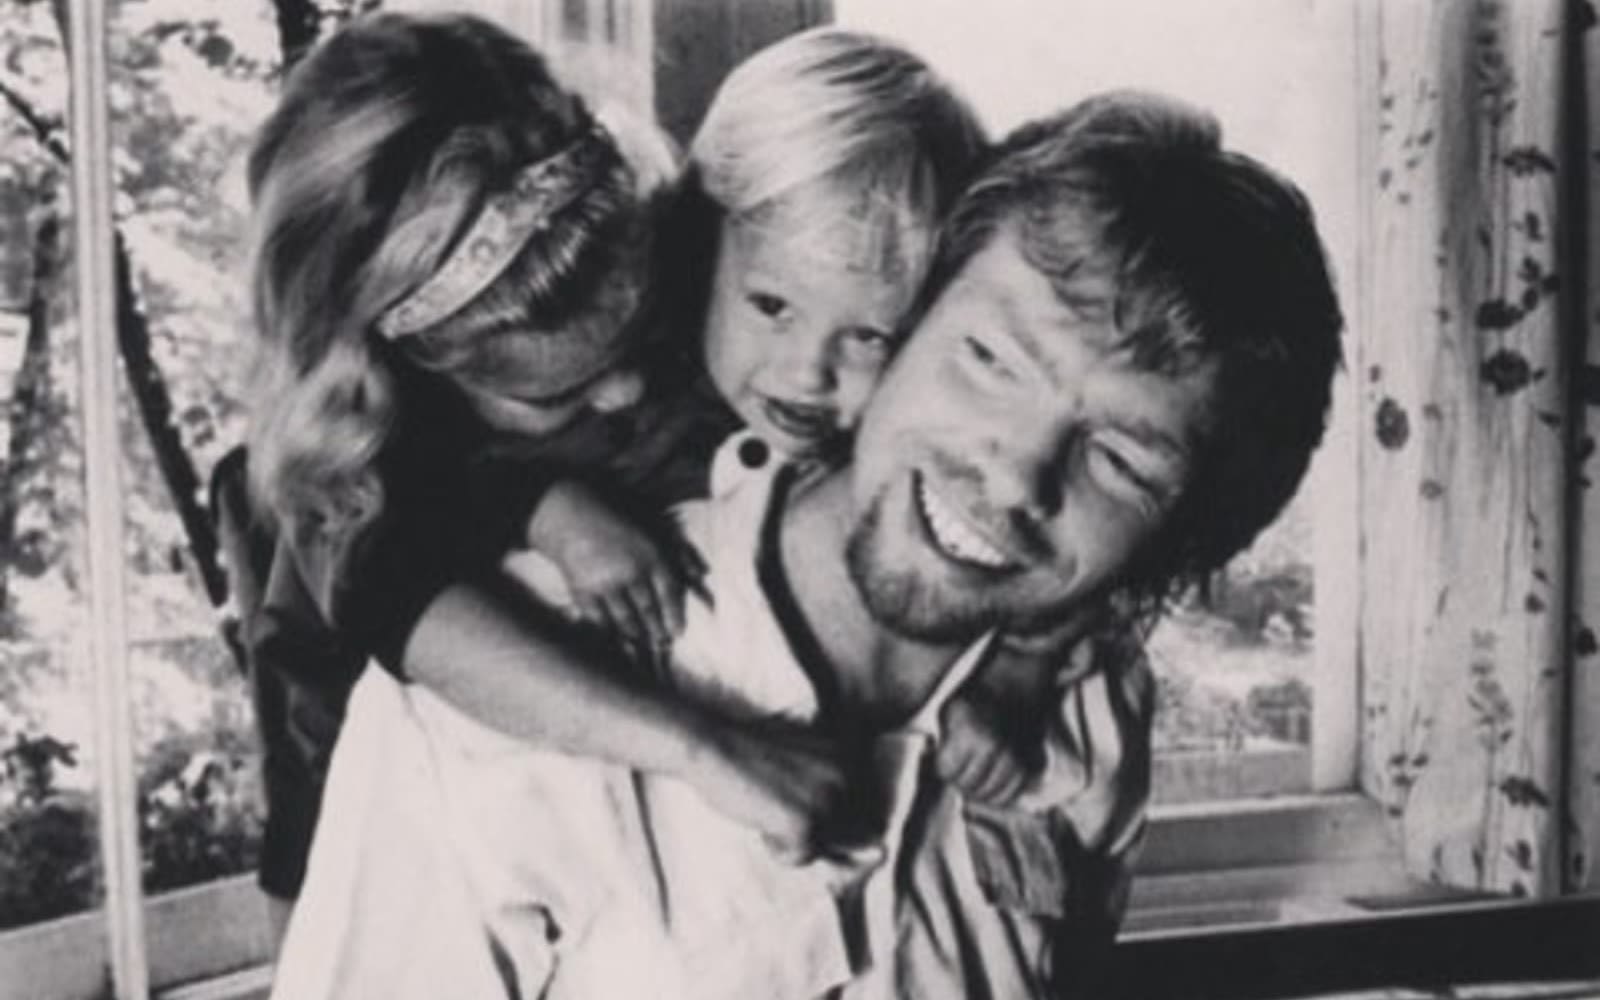 A young Richard Branson with Sam and Holly Branson as children on his back